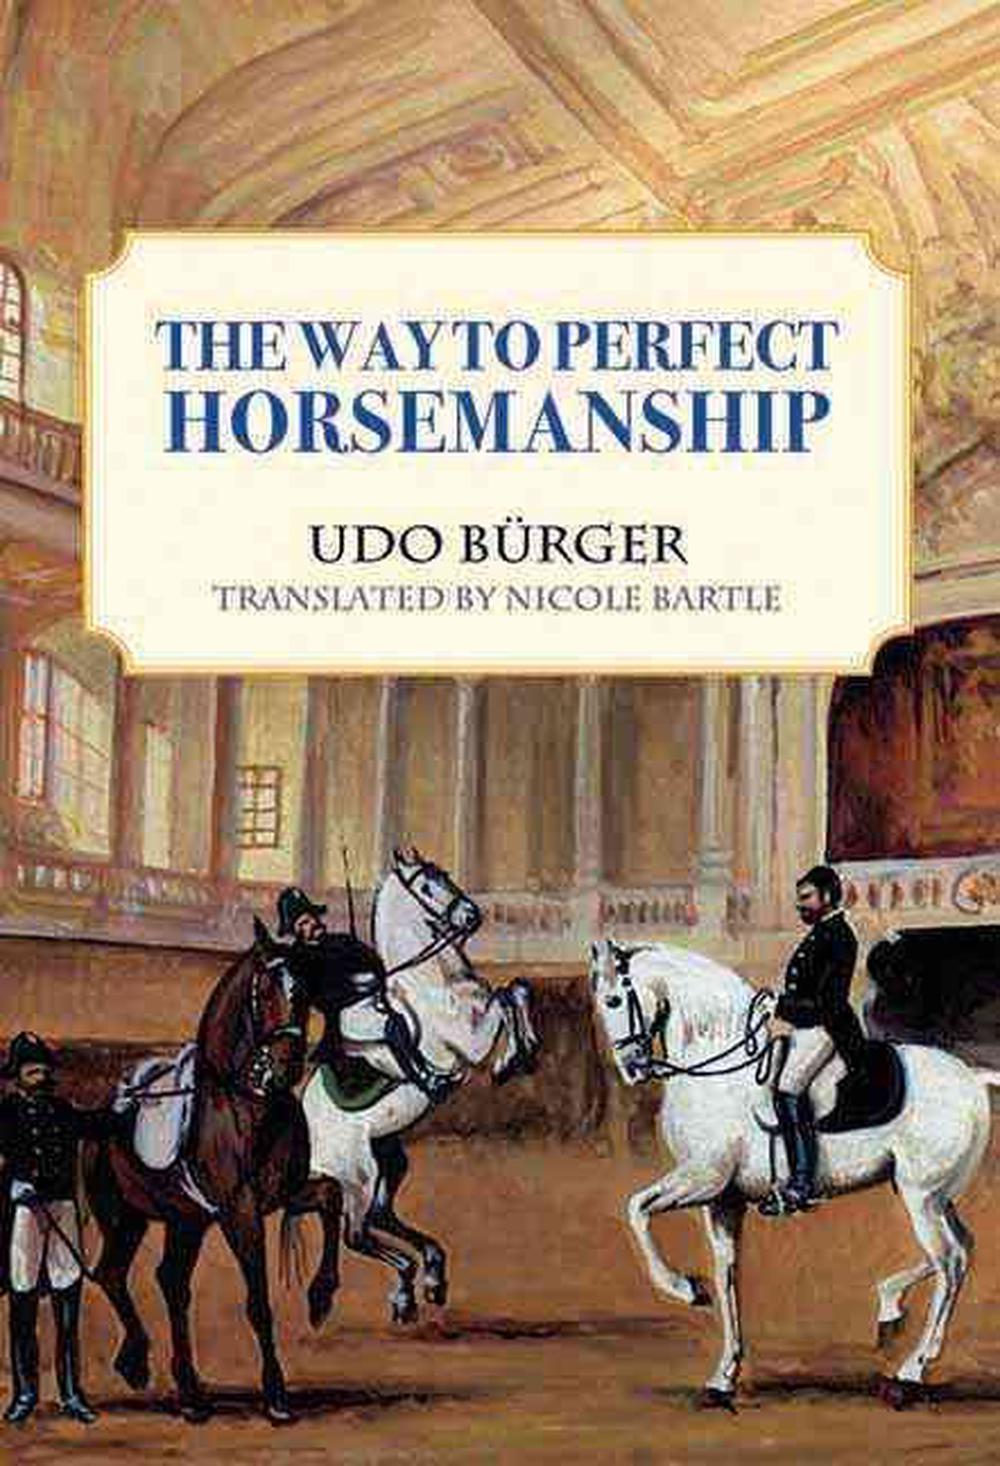 The Way to Perfect Horsemanship by Udo Burger